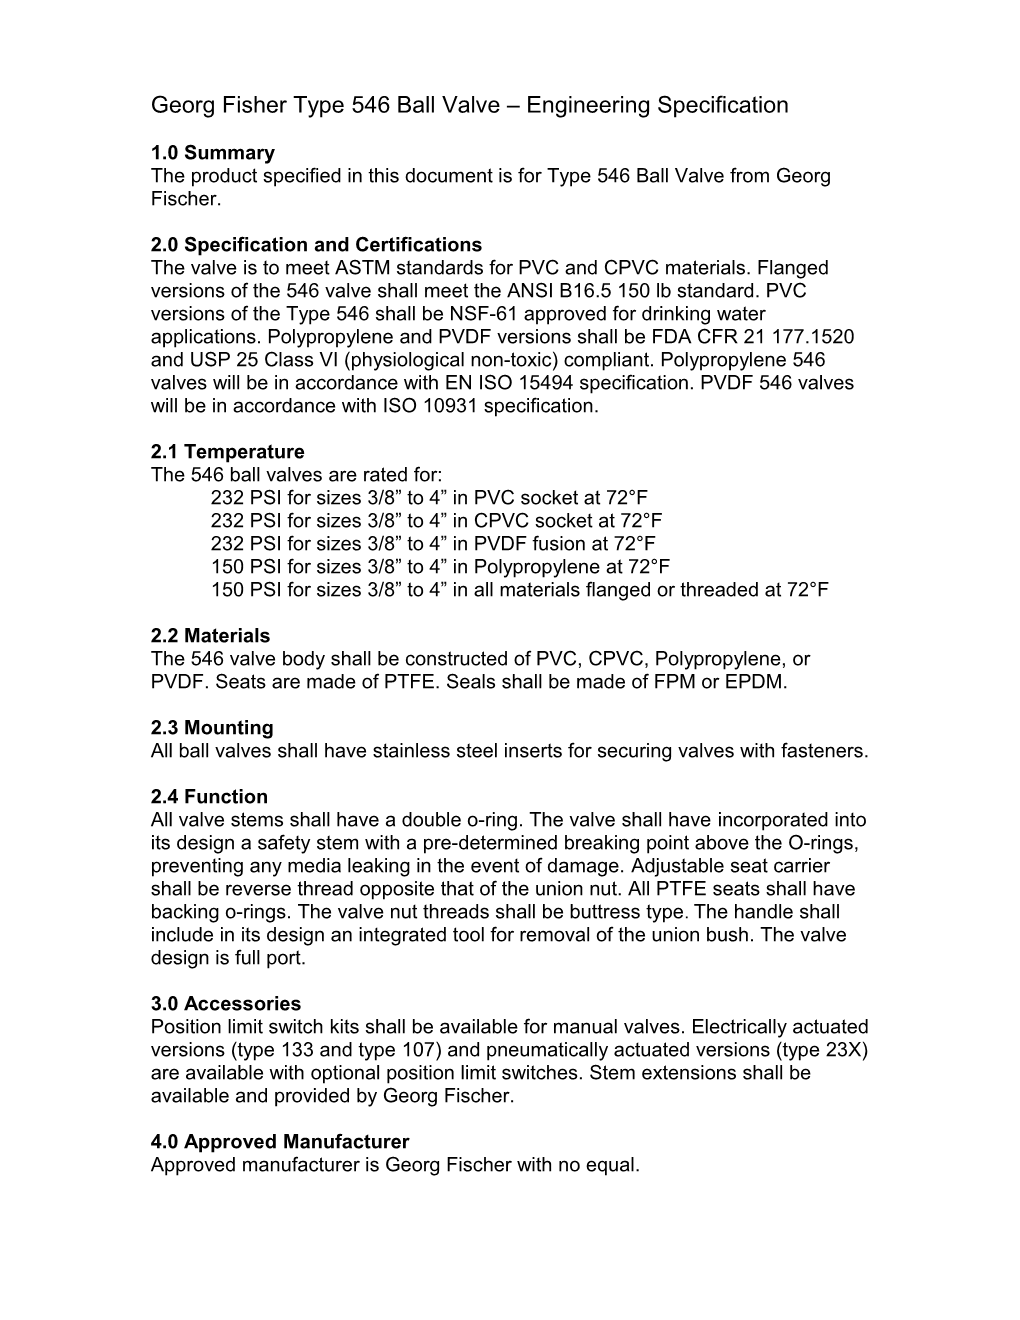 Georg Fisher Type 567 Butterfly Valve Engineering Specification